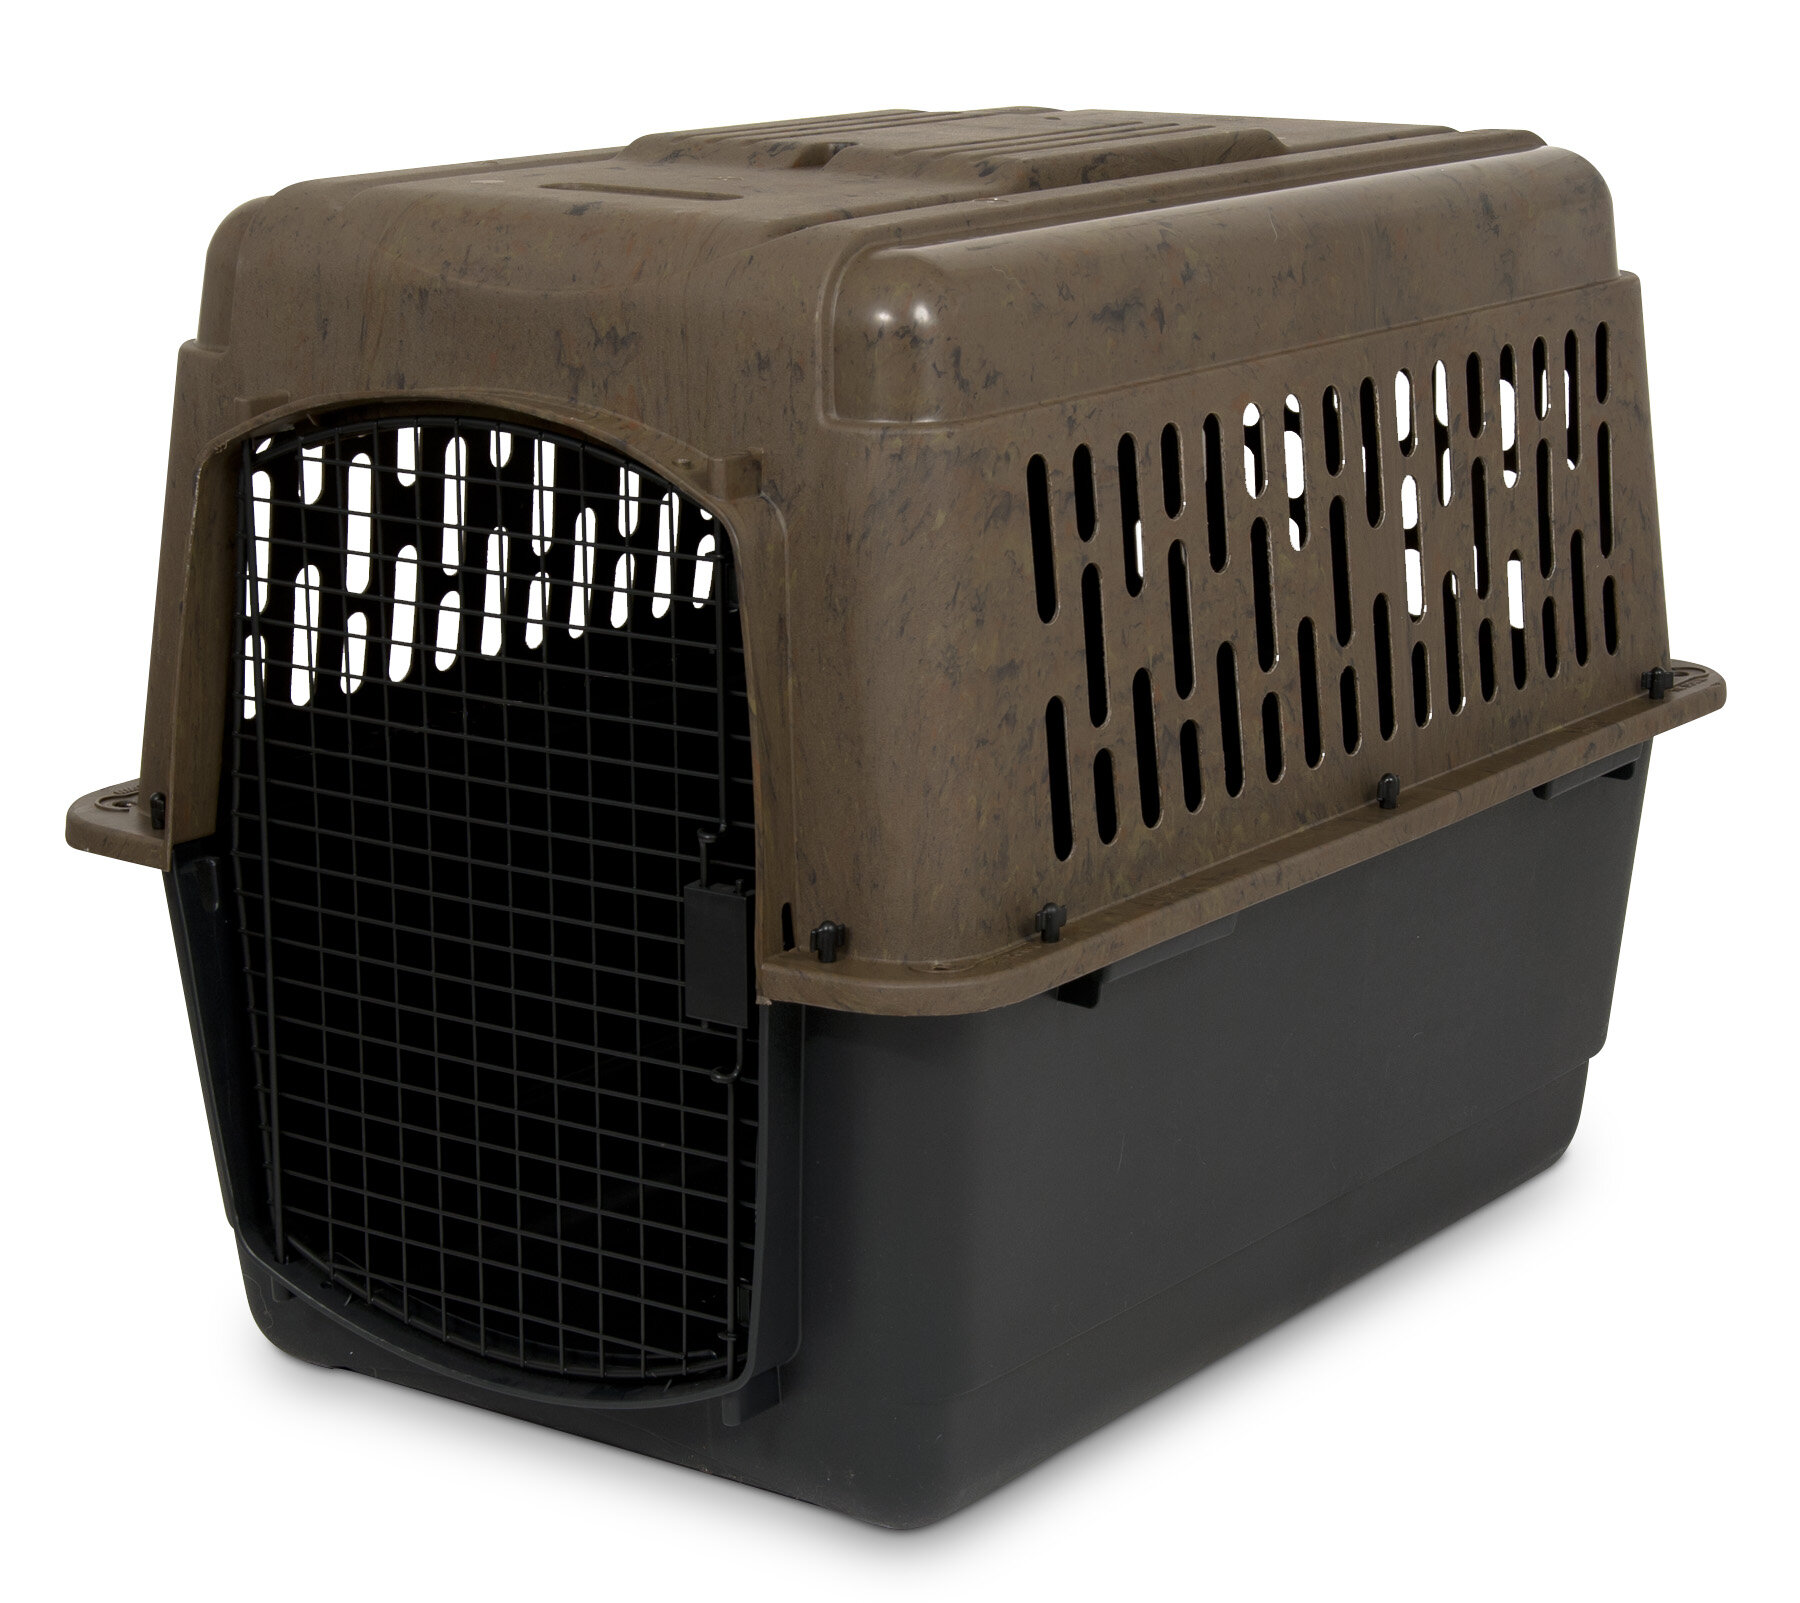 crate carrier